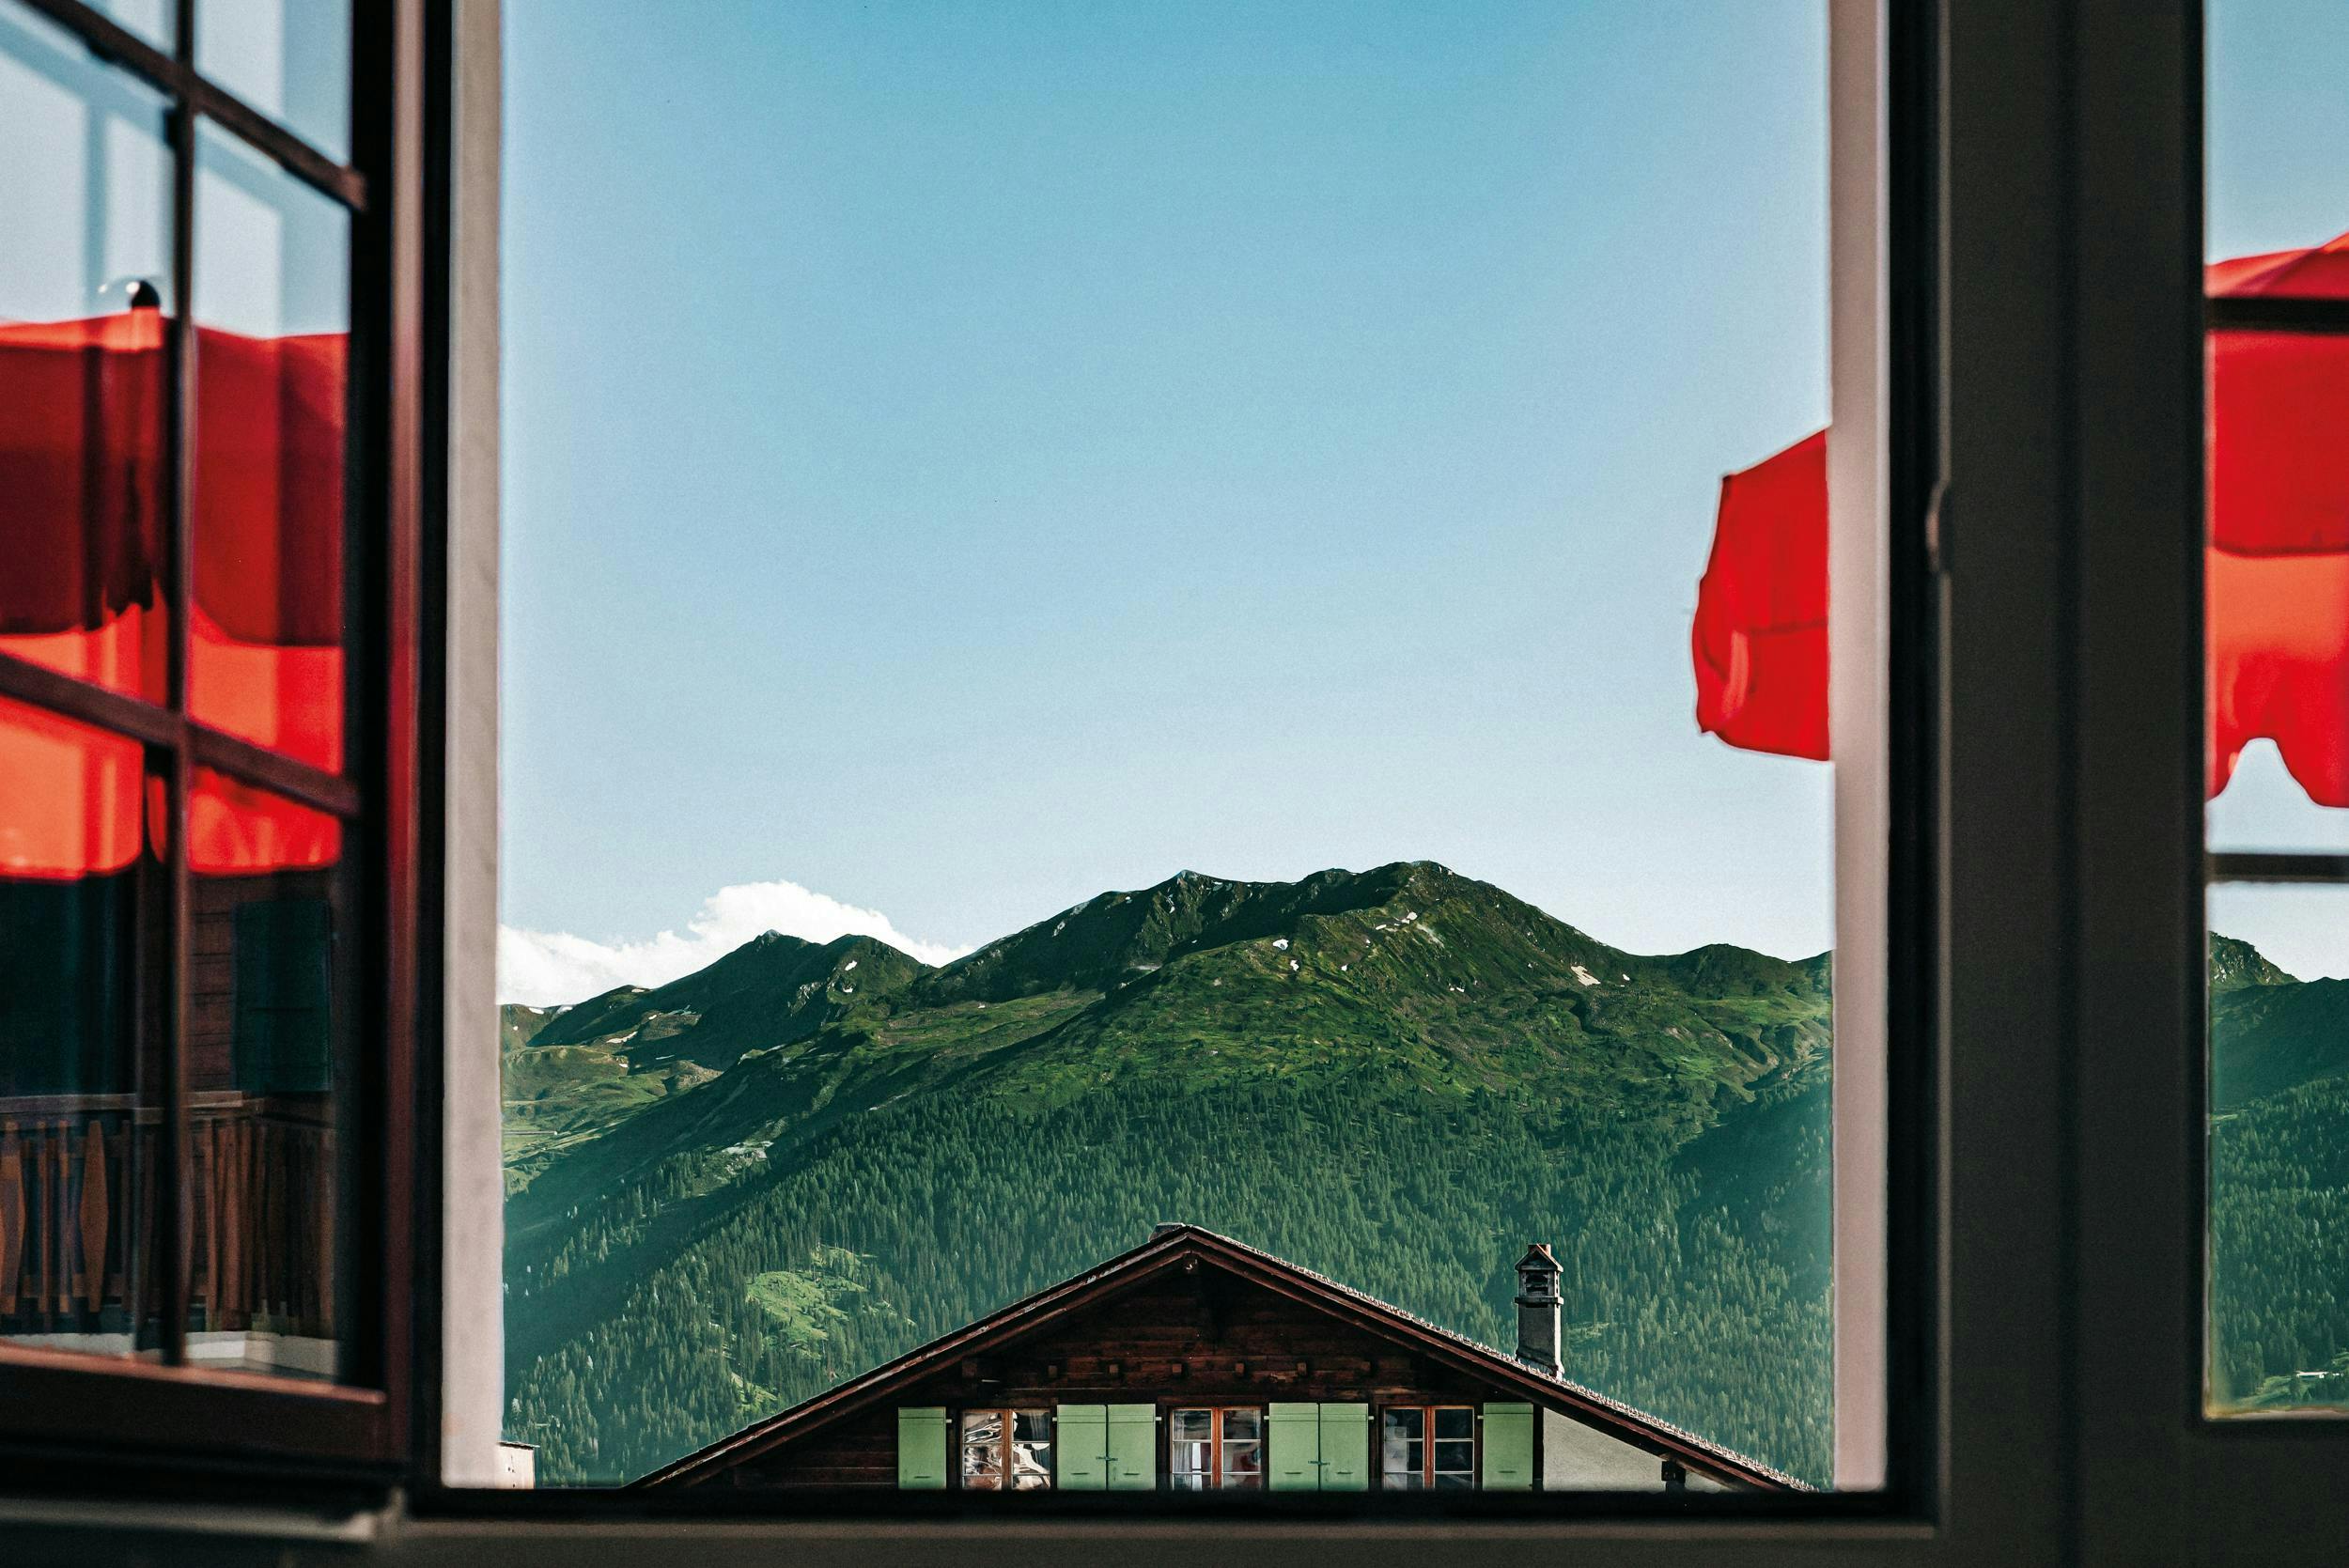 h - experimental chalet h - experimental chalet - terrasse architecture building outdoors shelter flag window nature